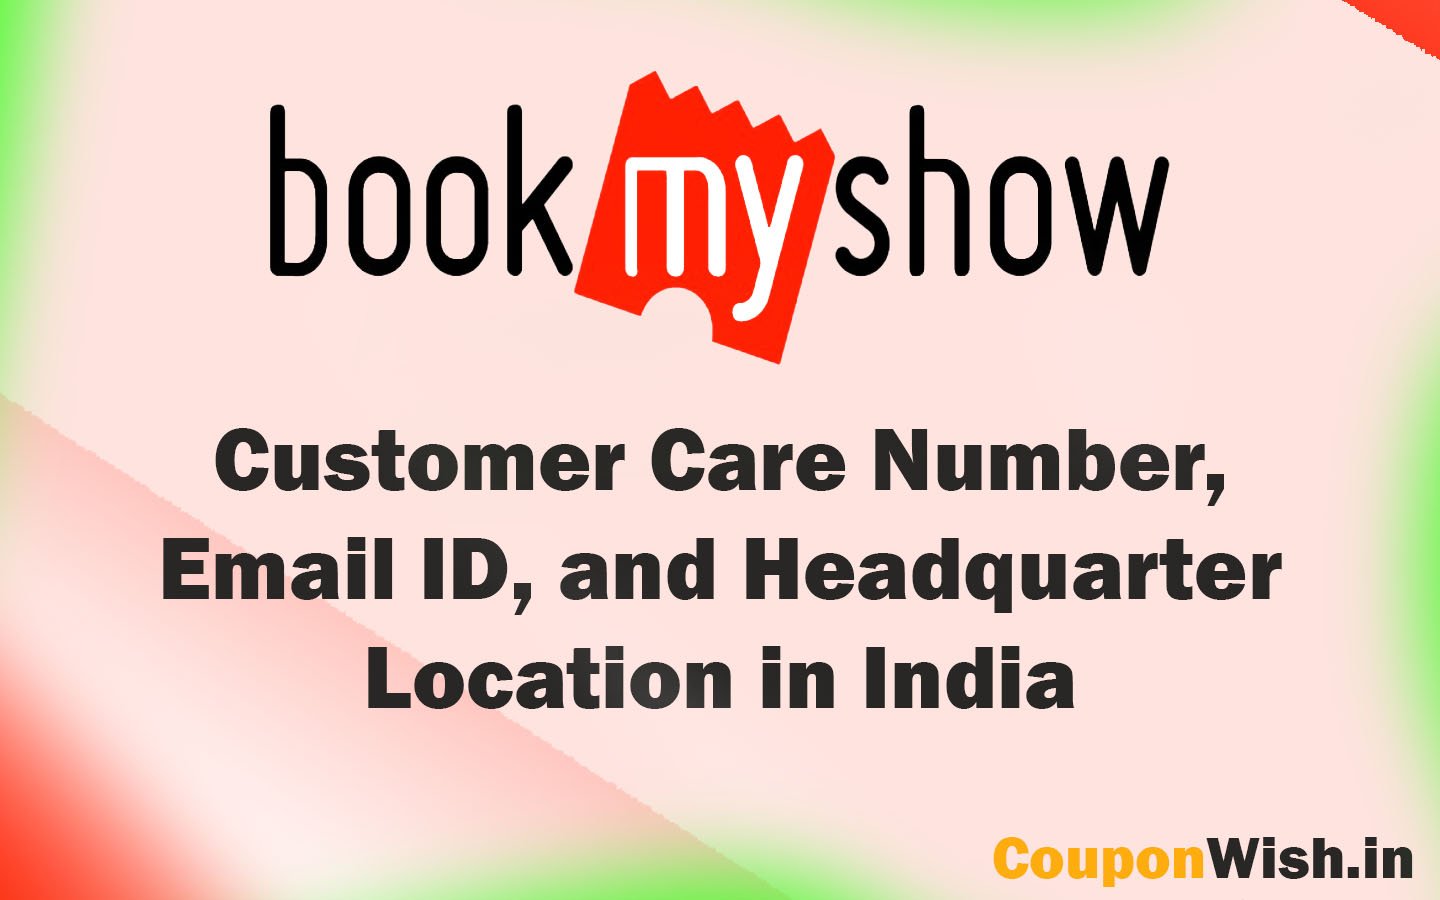 BookMyShow Customer Care Number, Email ID, and Headquarter Location in India